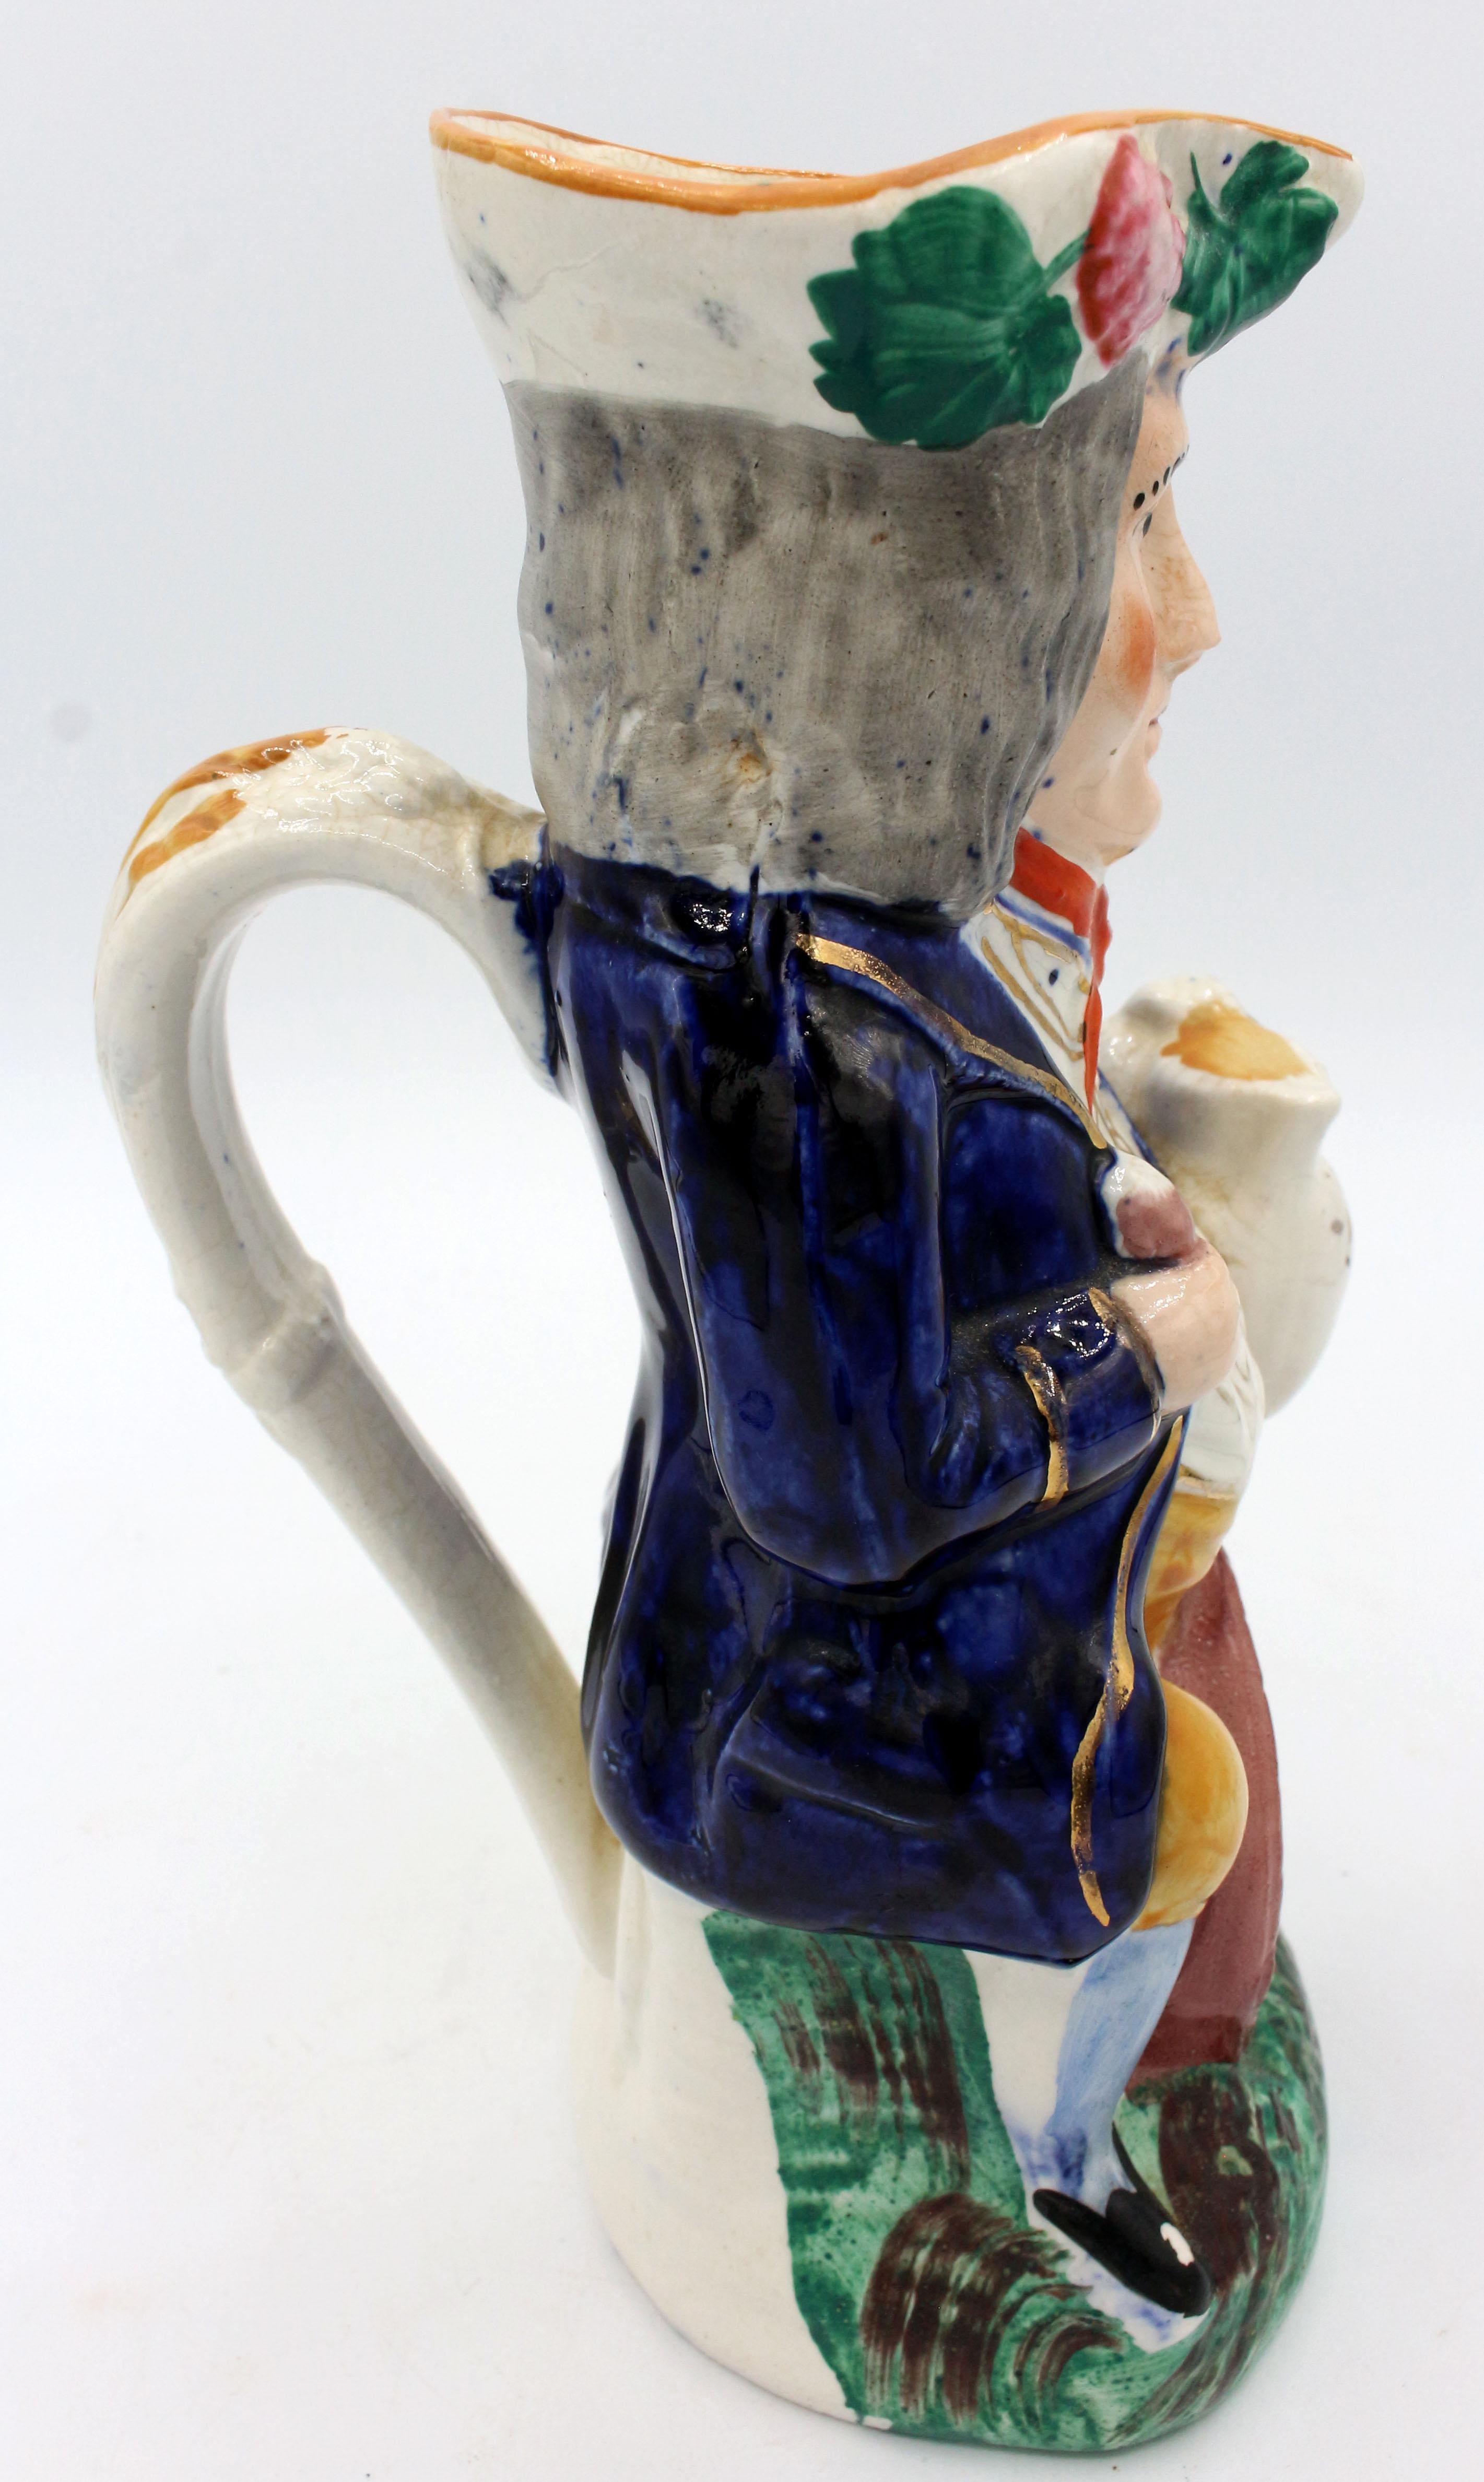 The Landlord Toby jug, circa 1860-80, Staffordshire, England. The chap looks askance - watching a suspicious customer? He is seated on his keg of 